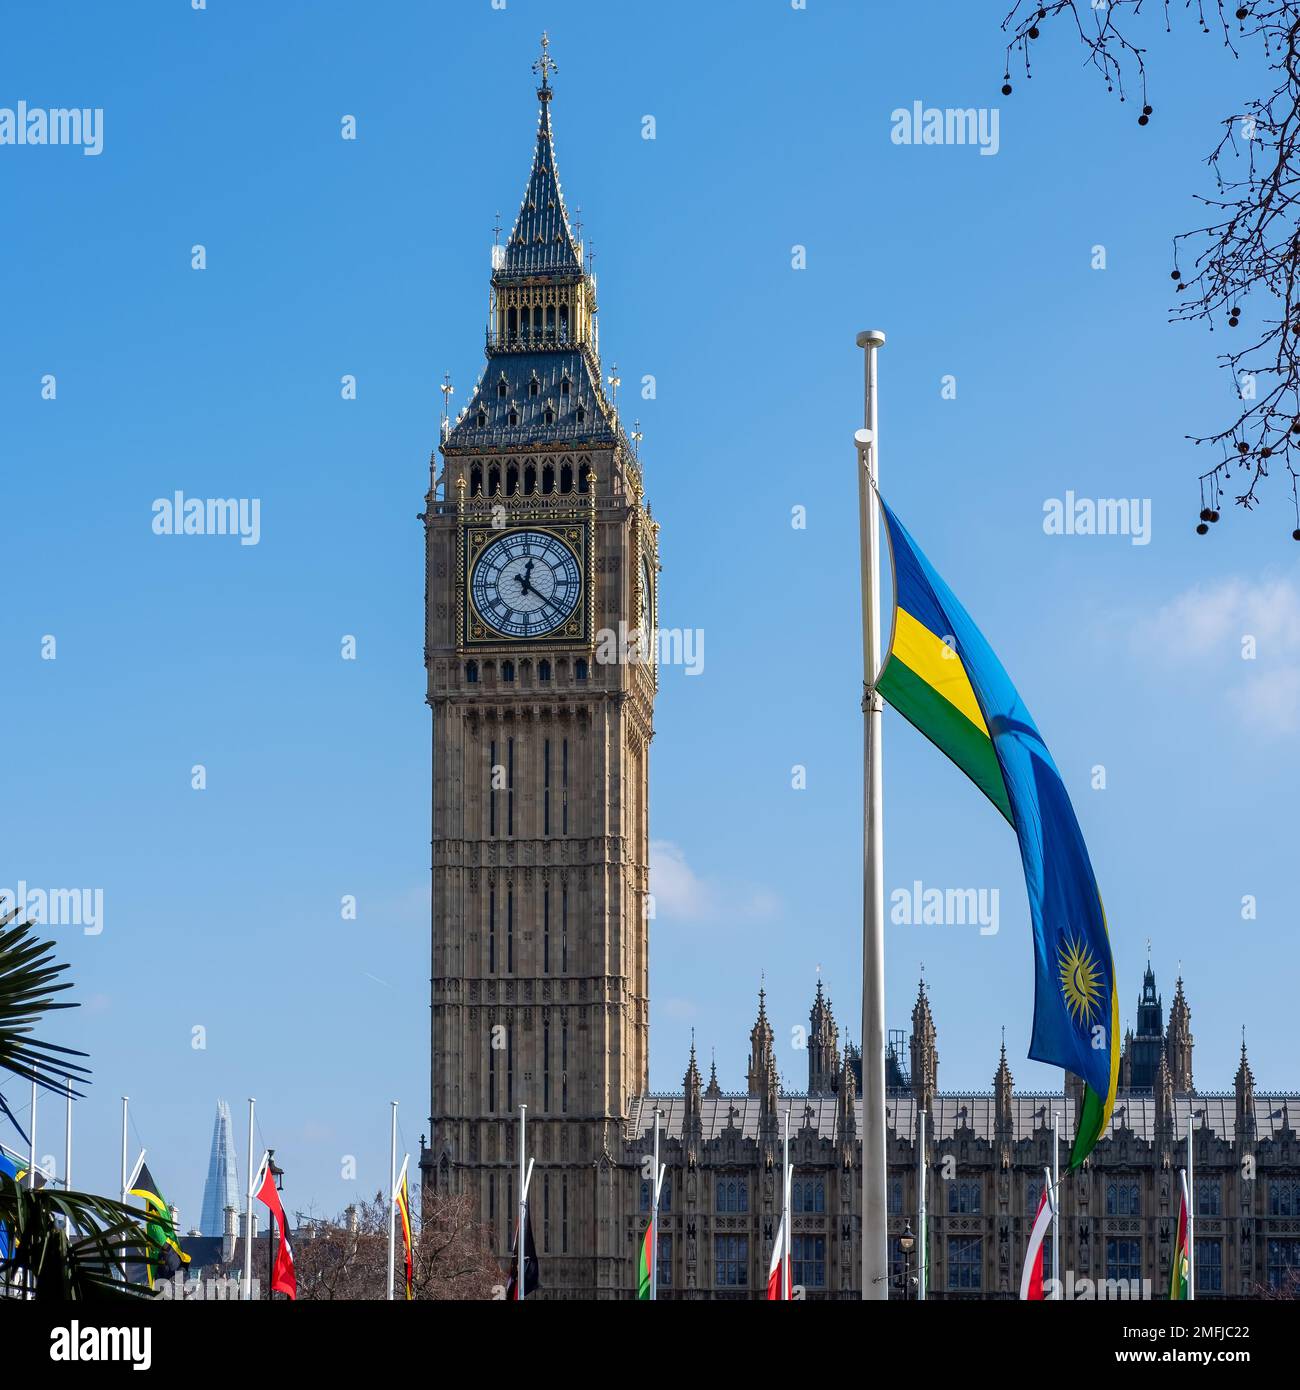 LONDON, UK - MARCH 13 : Flags Flying in Parliament Square London on March 13, 2016 Stock Photo